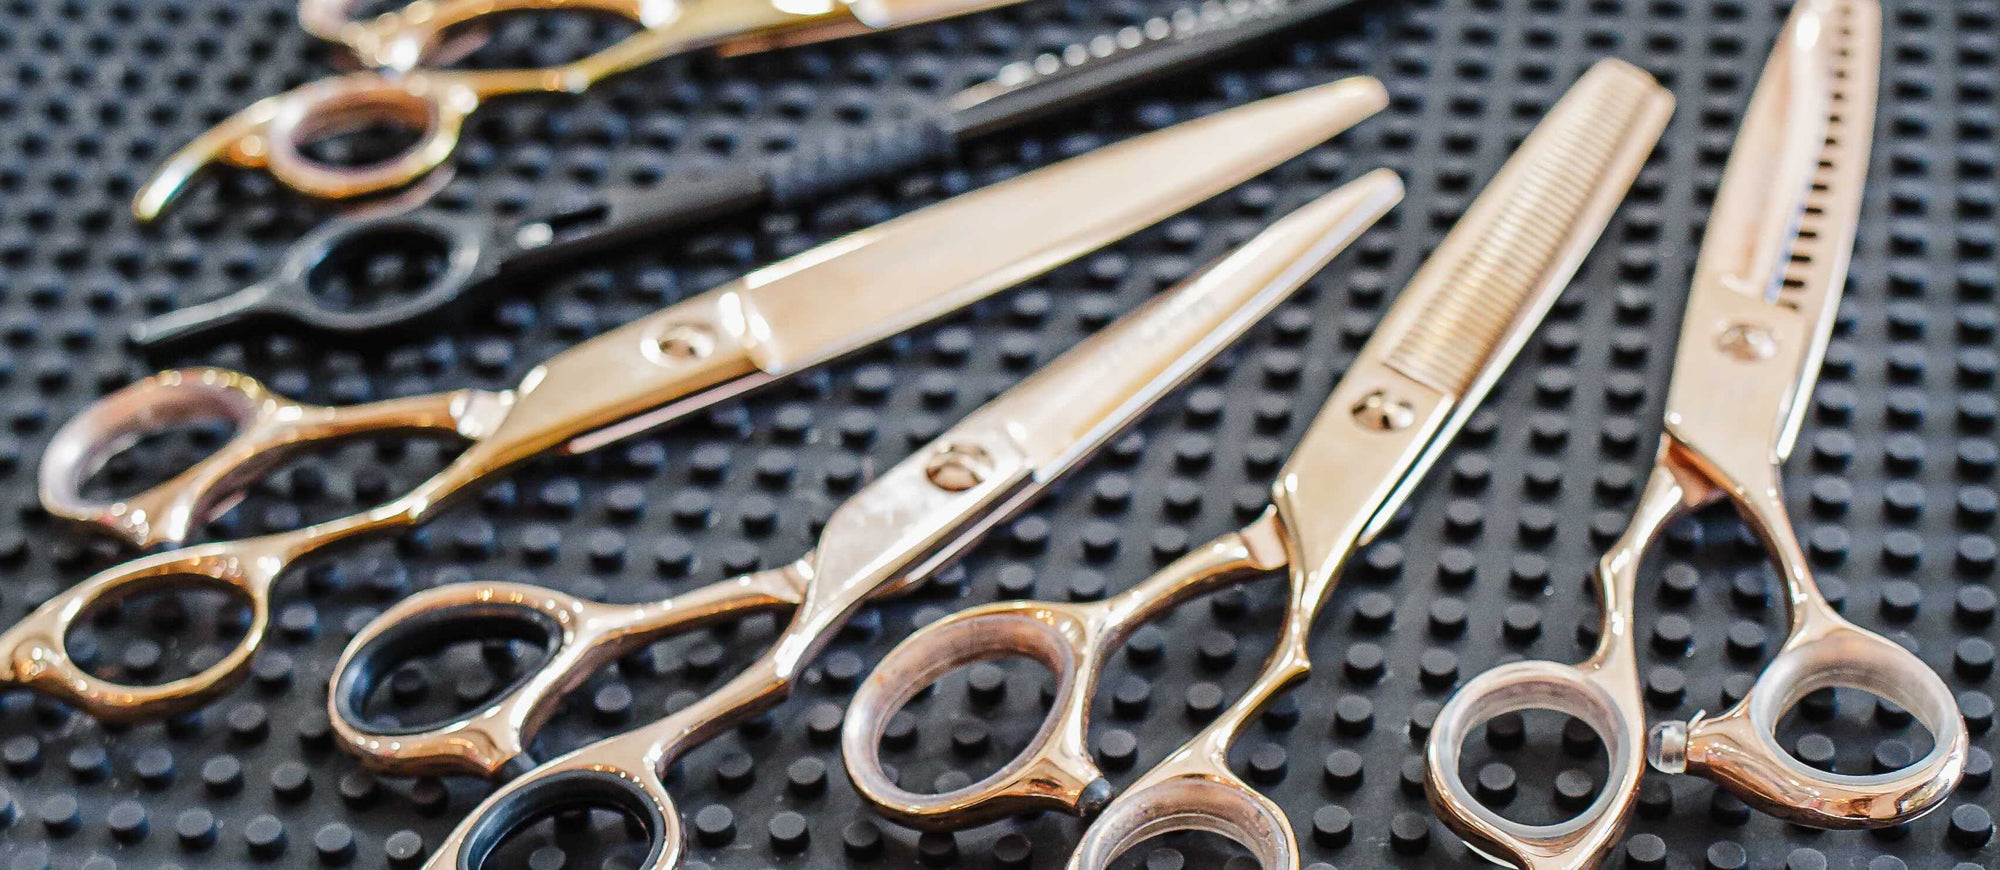 What To Consider When Purchasing Your New Hair Shears